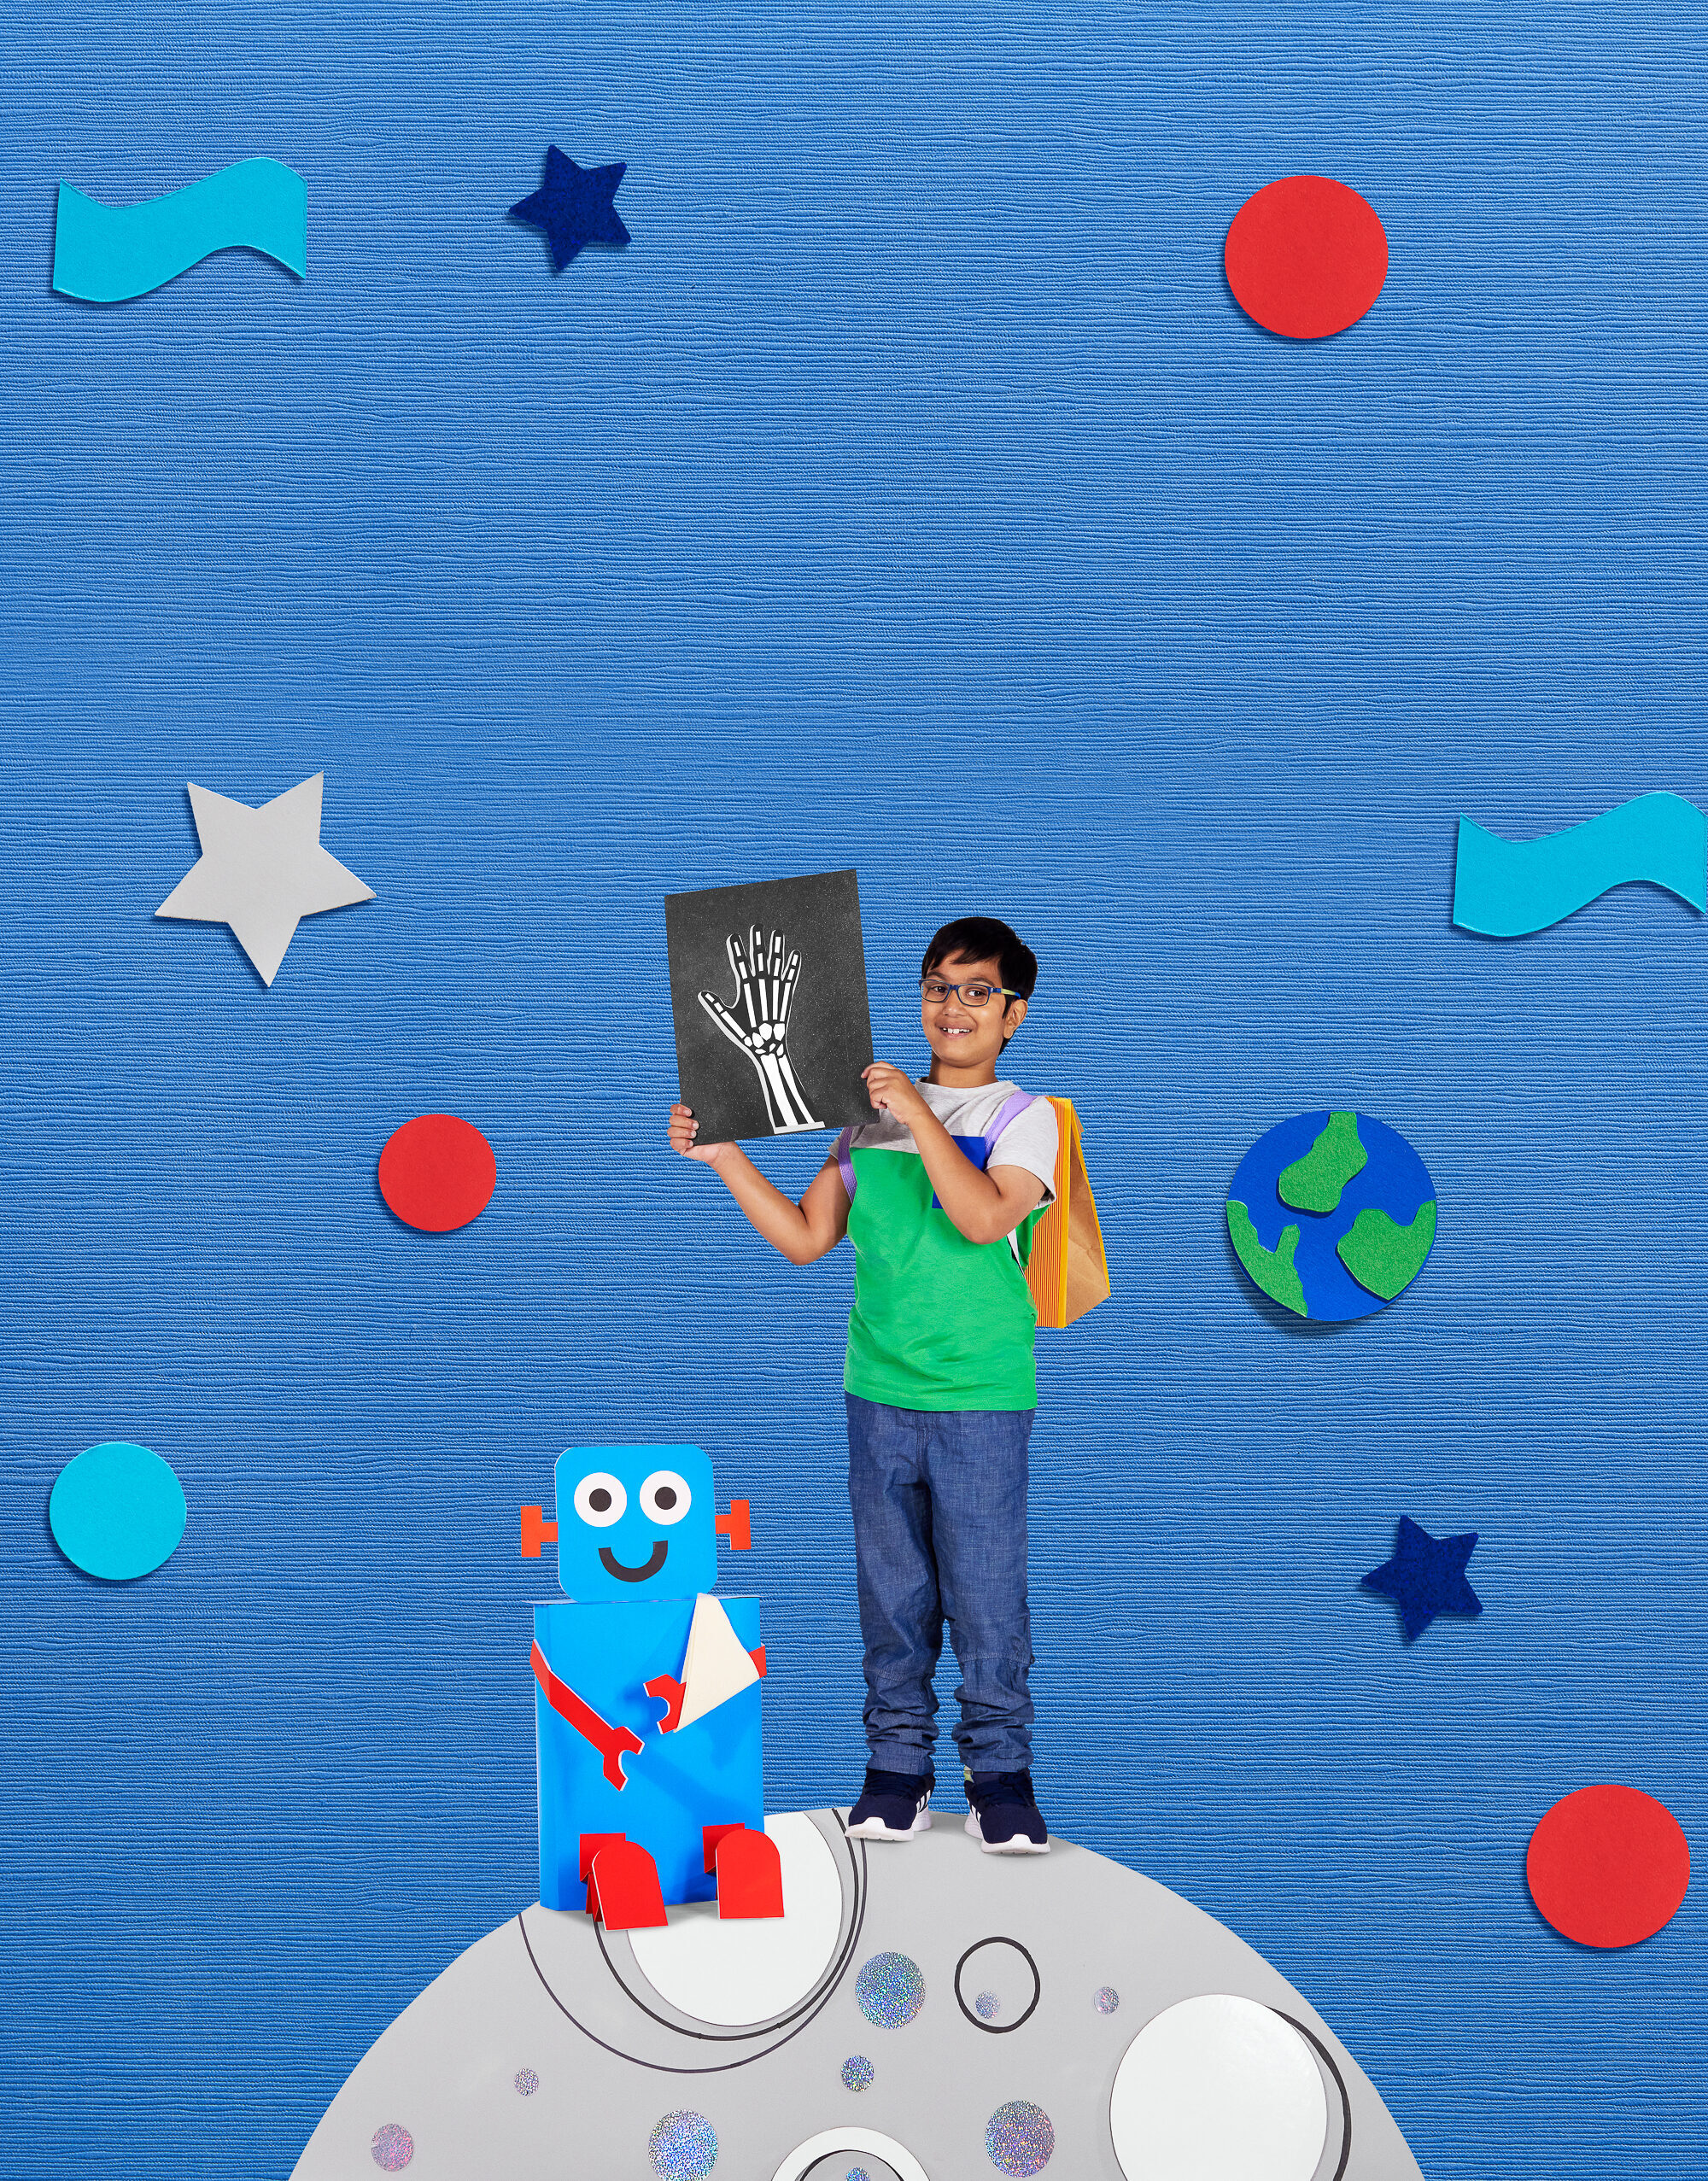 A boy with medium skin tone and dark hair, wearing a backpack and holding up an x-ray of a hand. He is standing on a cut-out image of a moon with a blue robot sitting next to him.